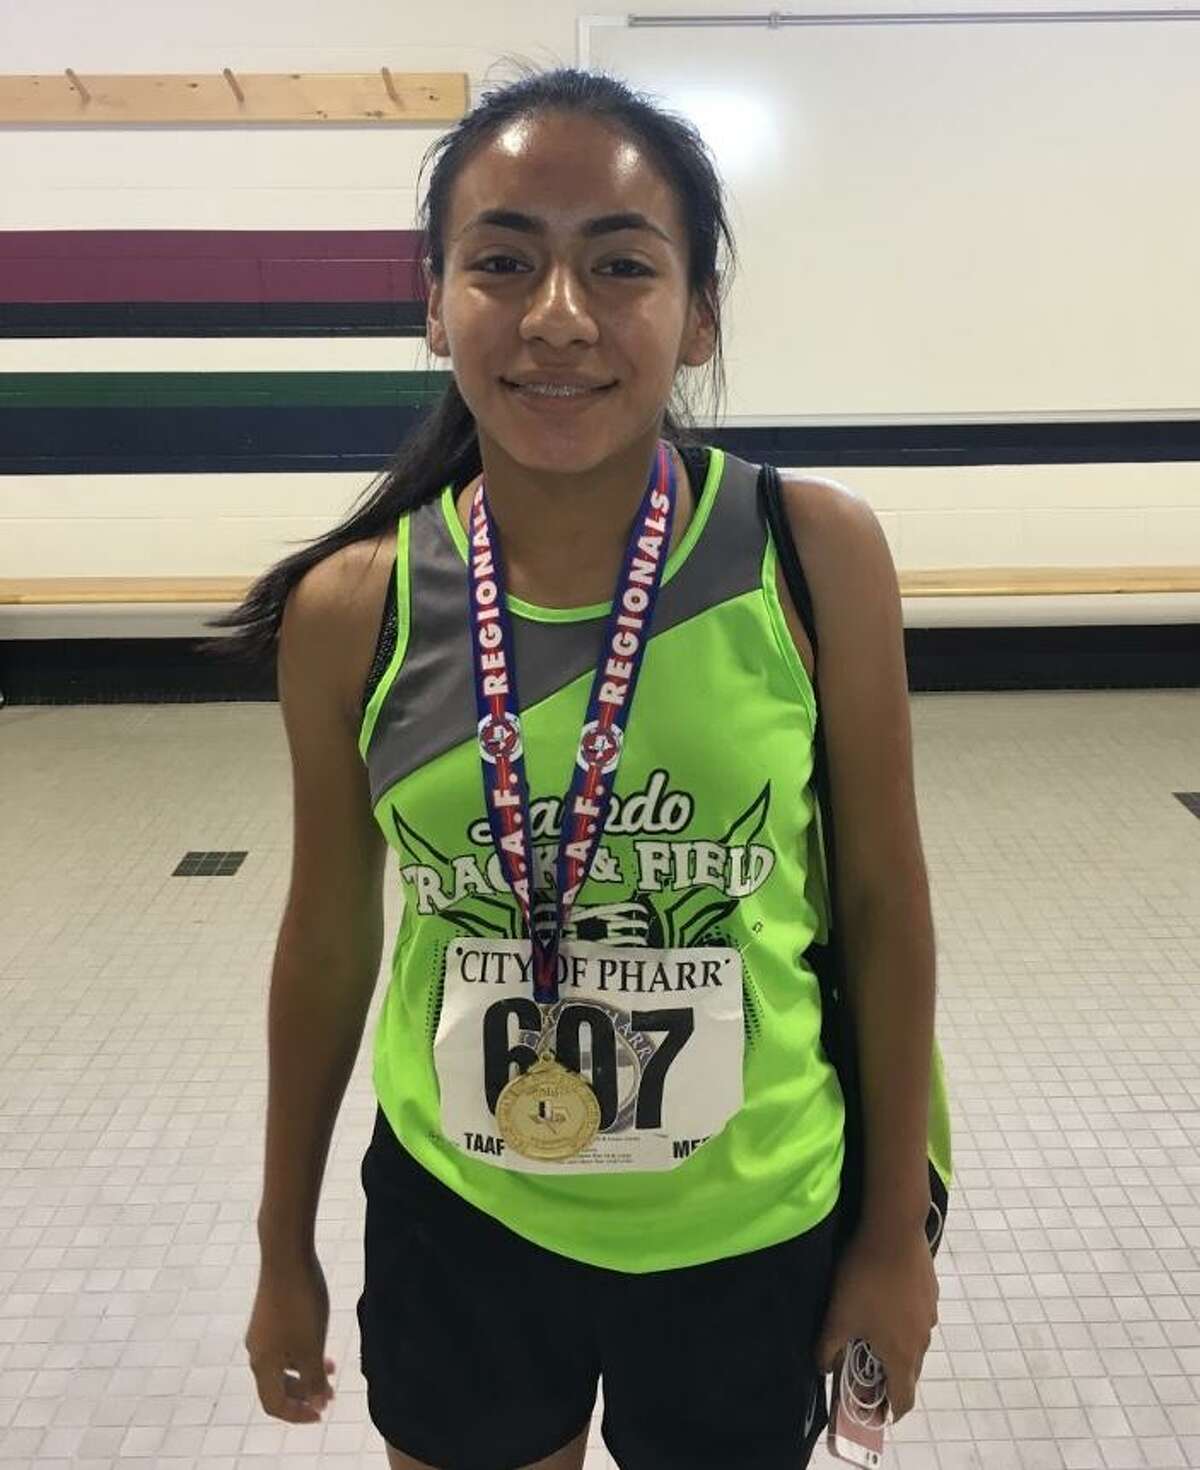 Valerie Garcia earned a spot at the state meet in College Station July 26-28.